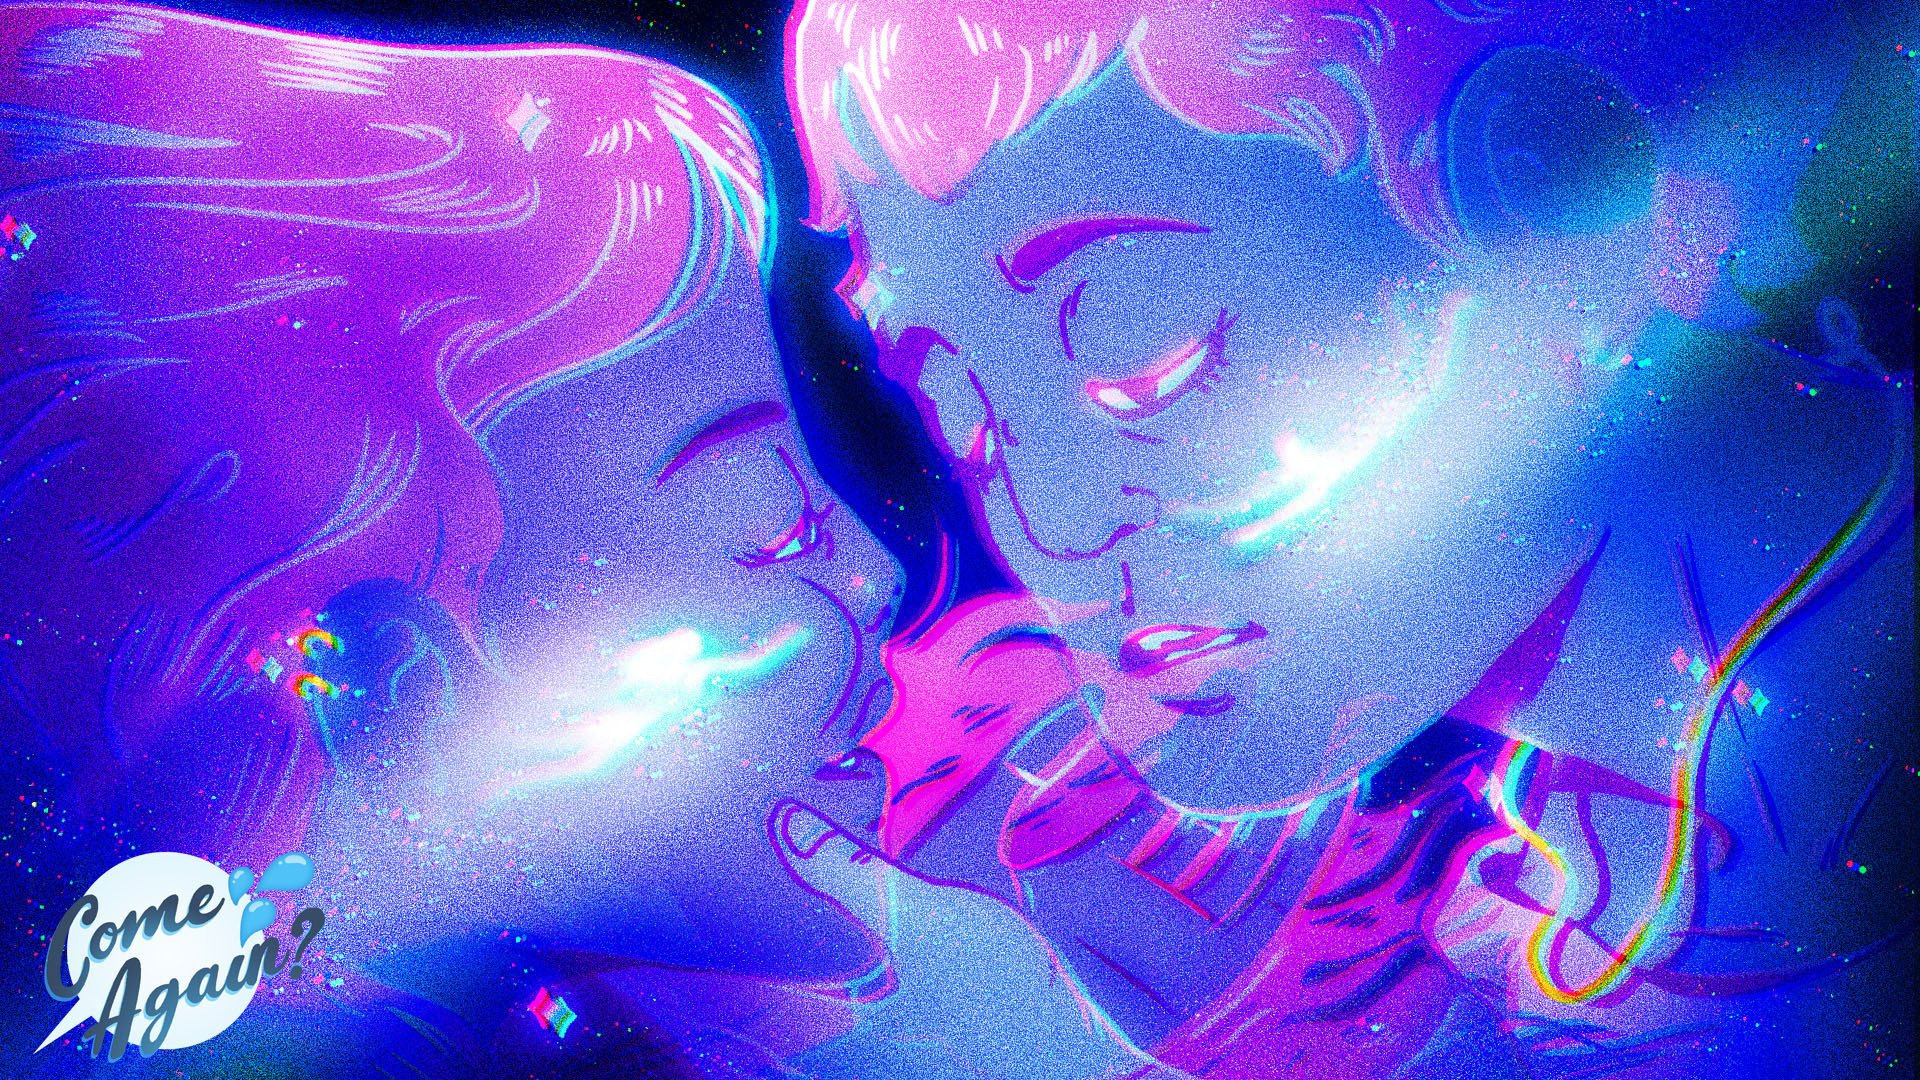 A purple illustration of two people about to kiss